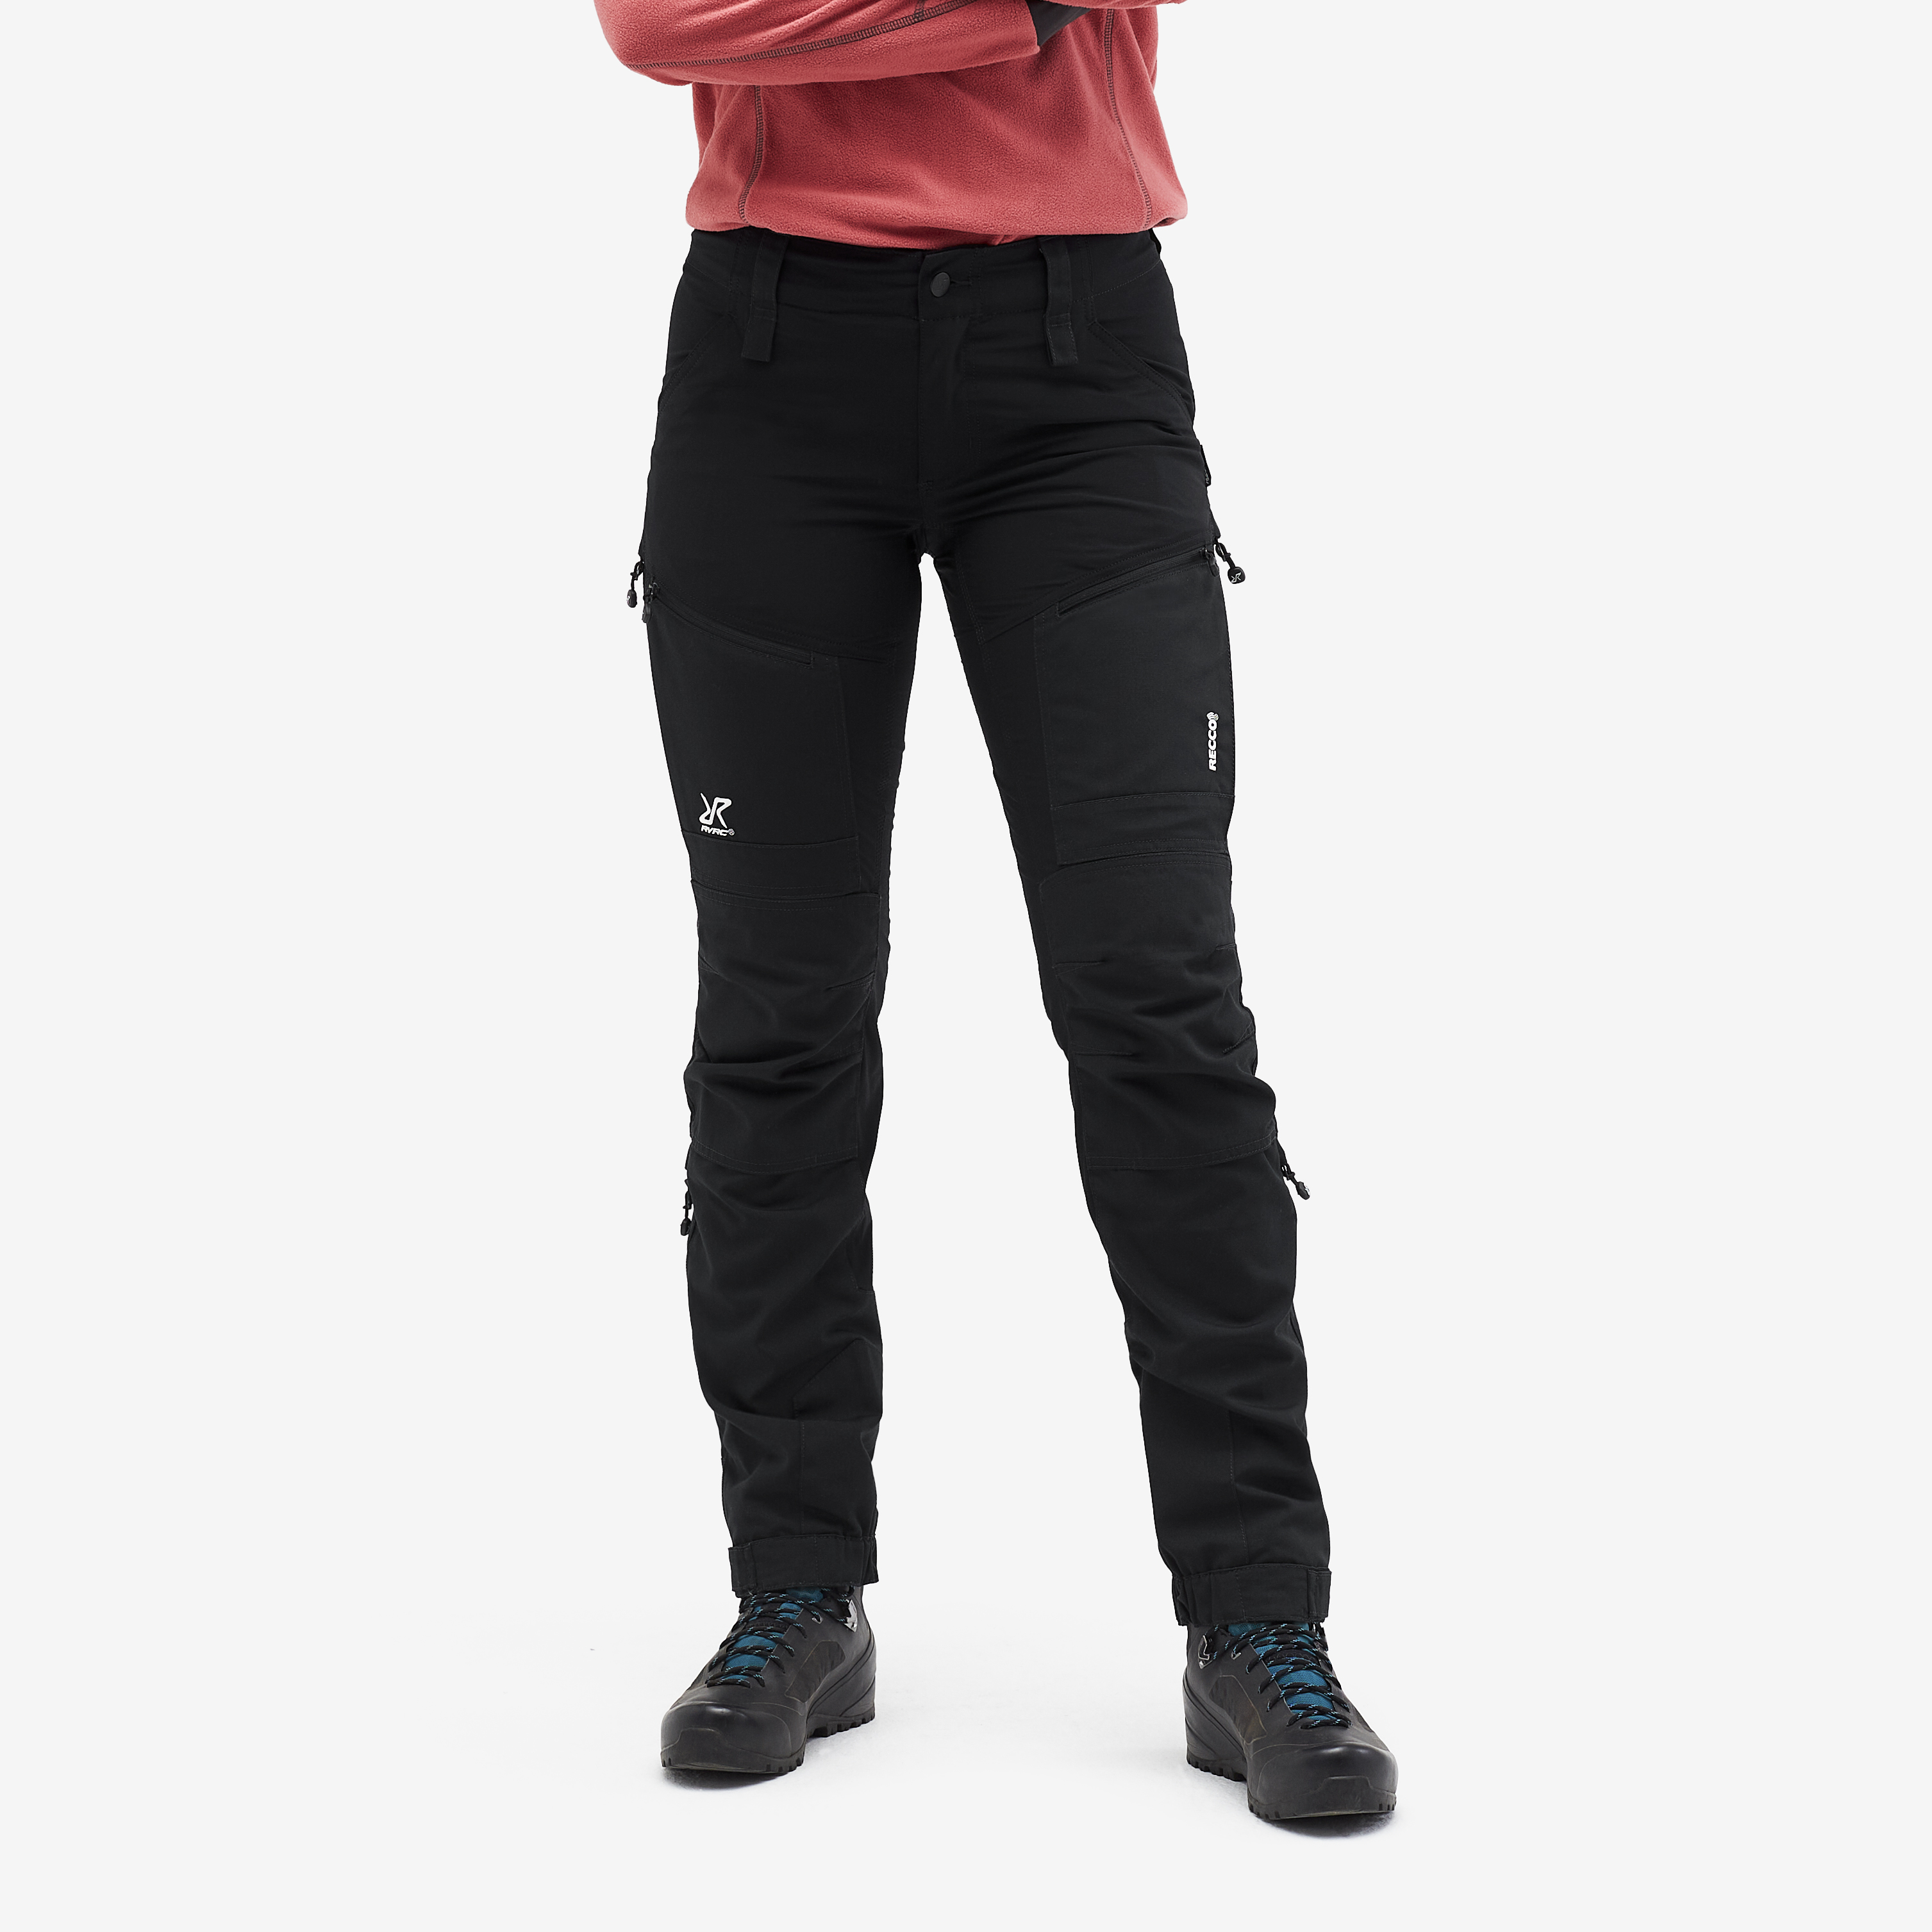 Mens walking trousers and hiking, trekking pants for the great outdoors –  Montane - UK